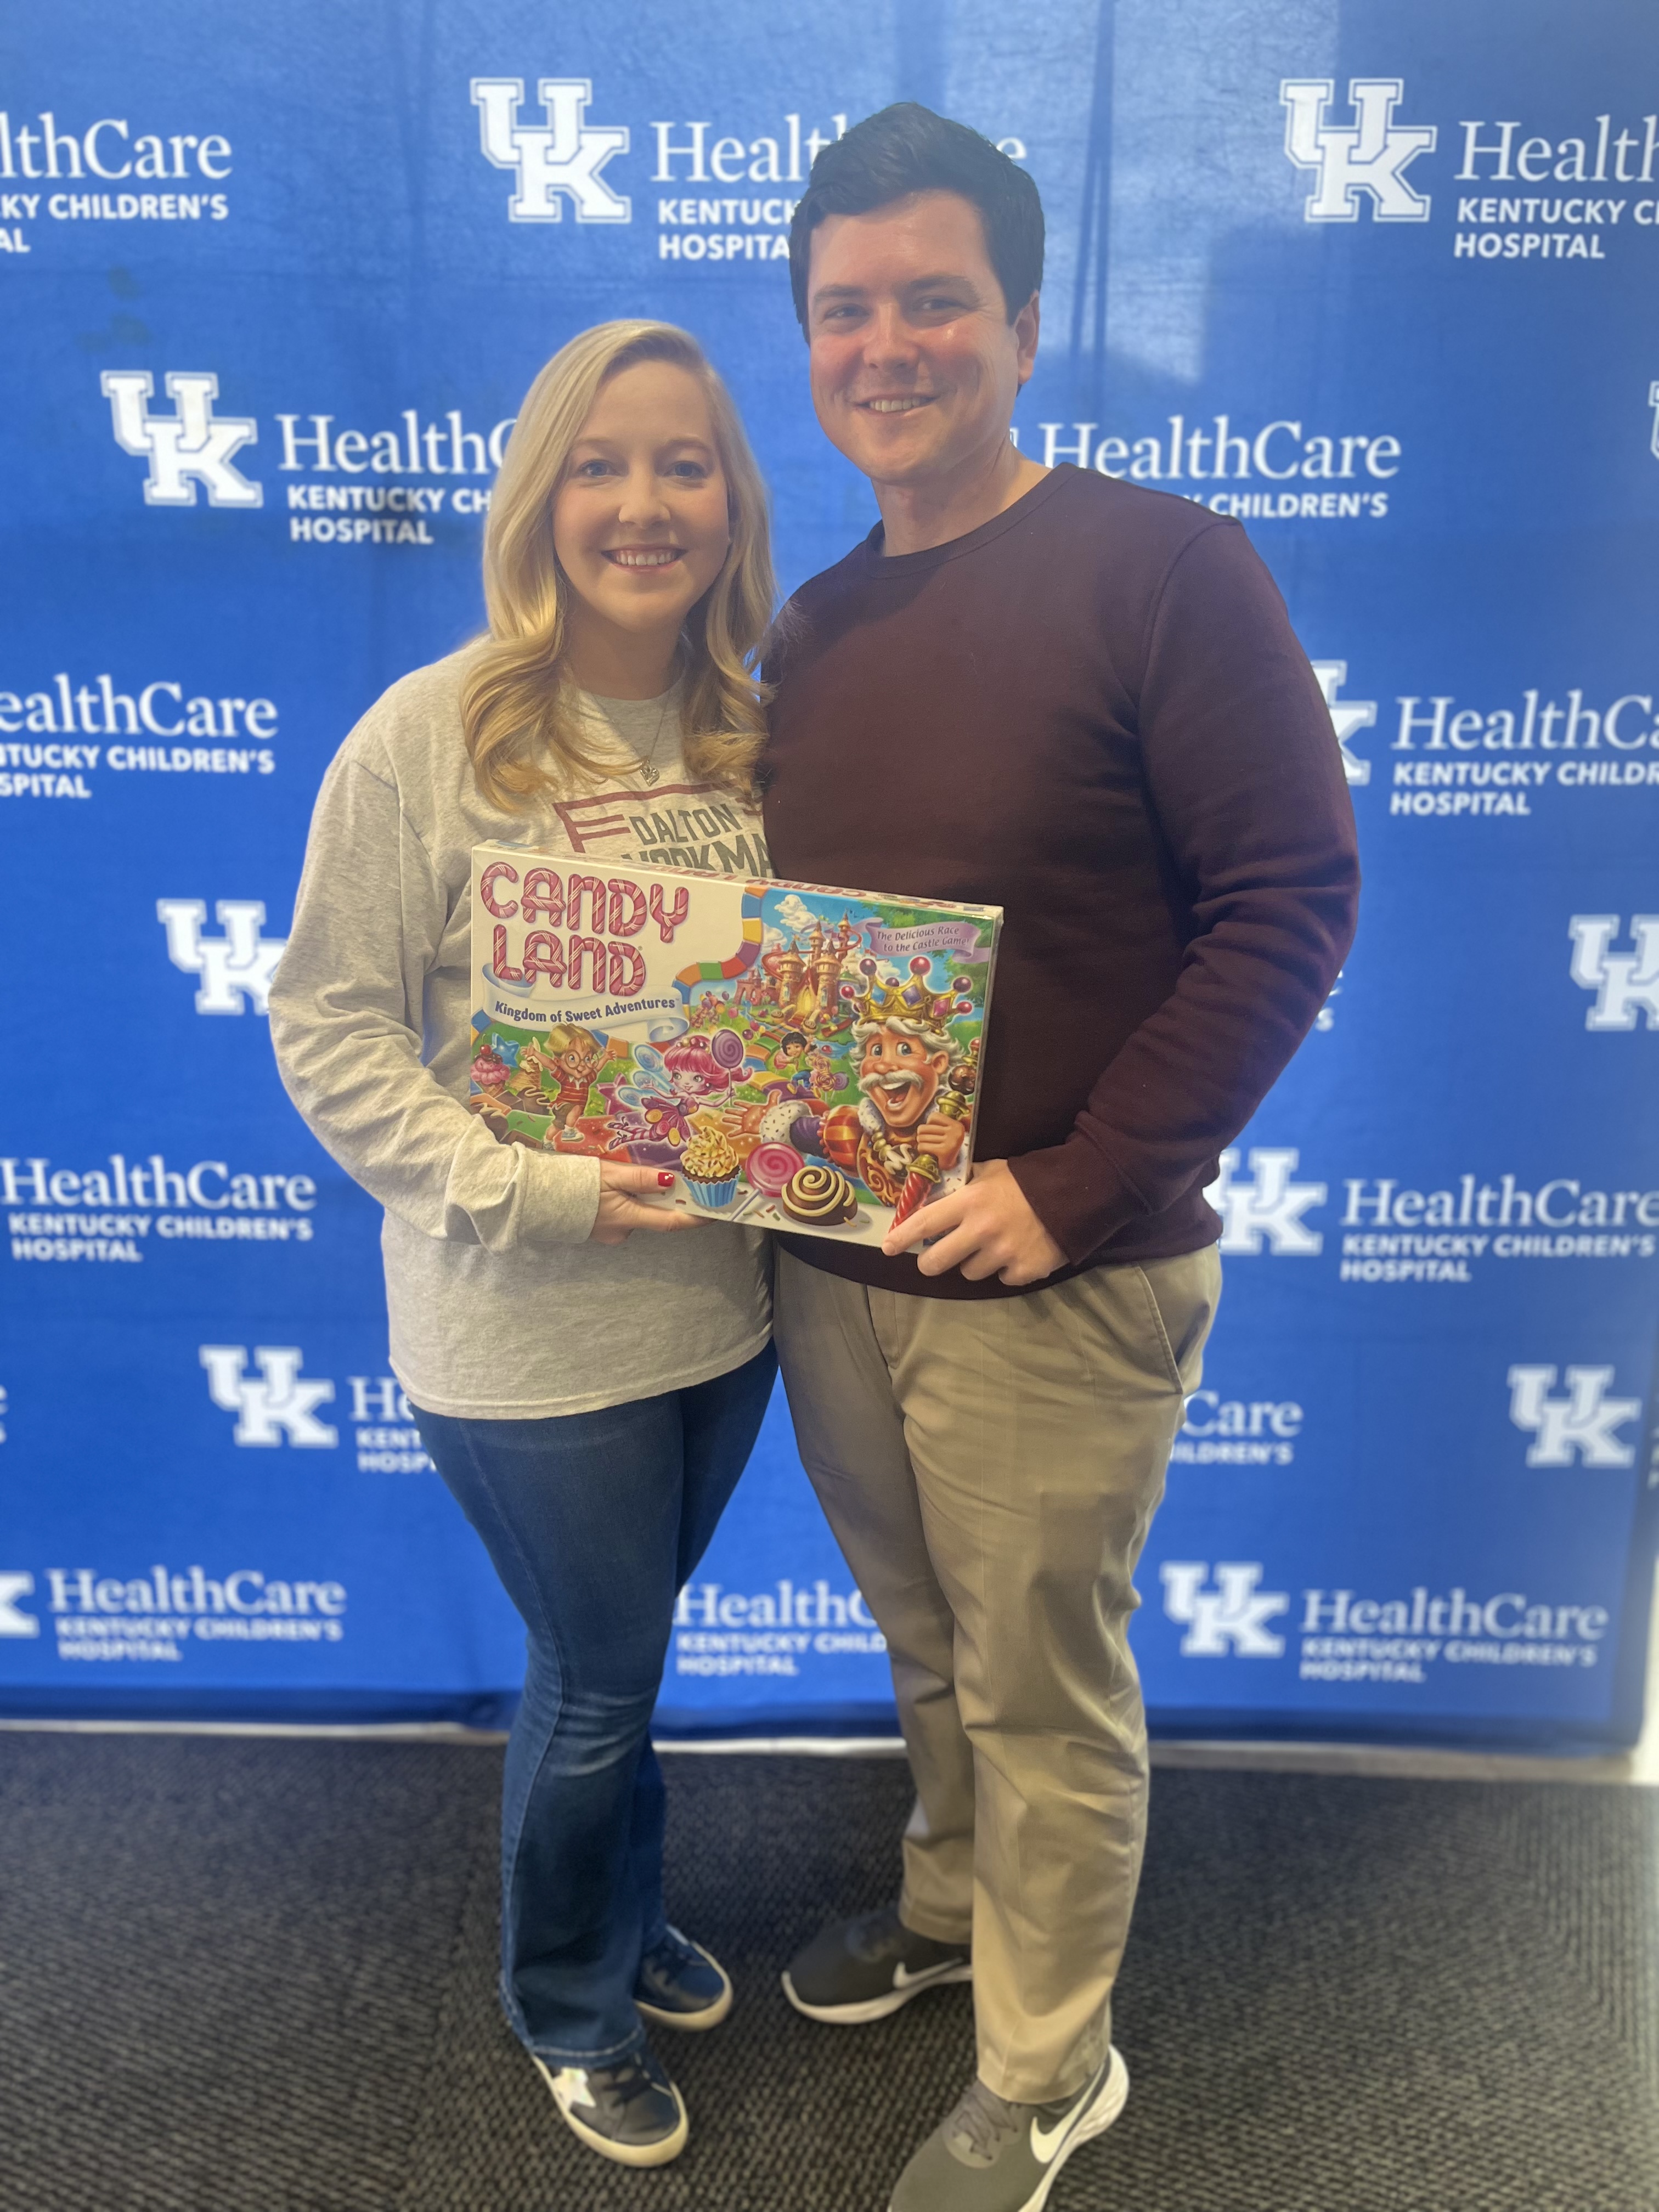 2nd annual holiday toy drive benefiting UK’s Children’s Hospital. Over 200 donations delivered.